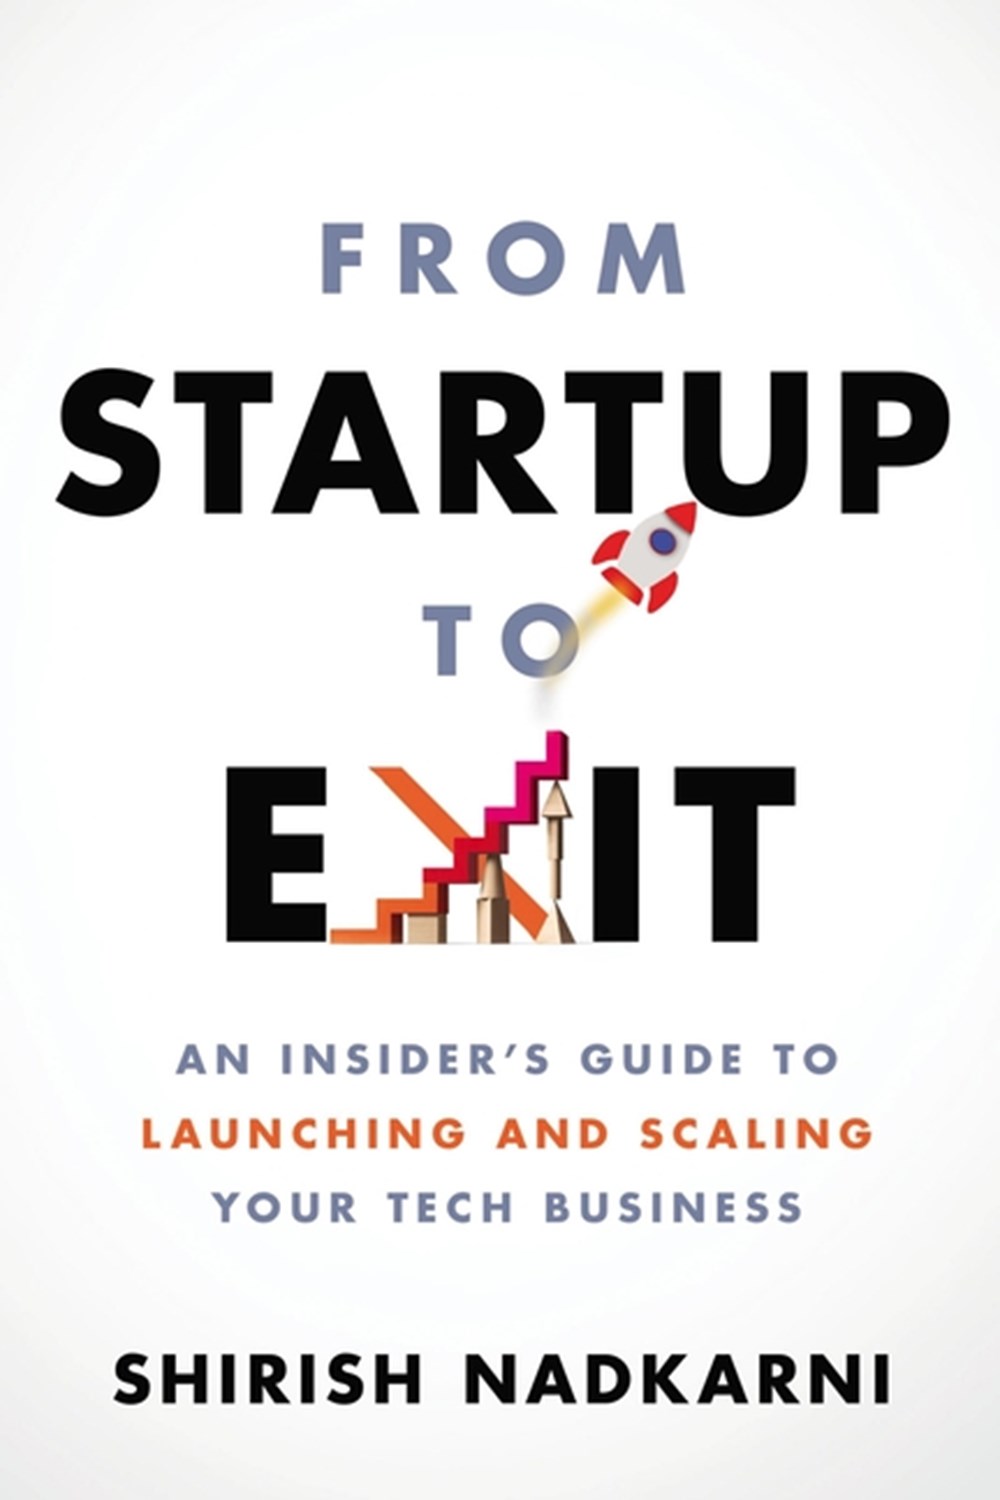 From Startup to Exit An Insider's Guide to Launching and Scaling Your Tech Business